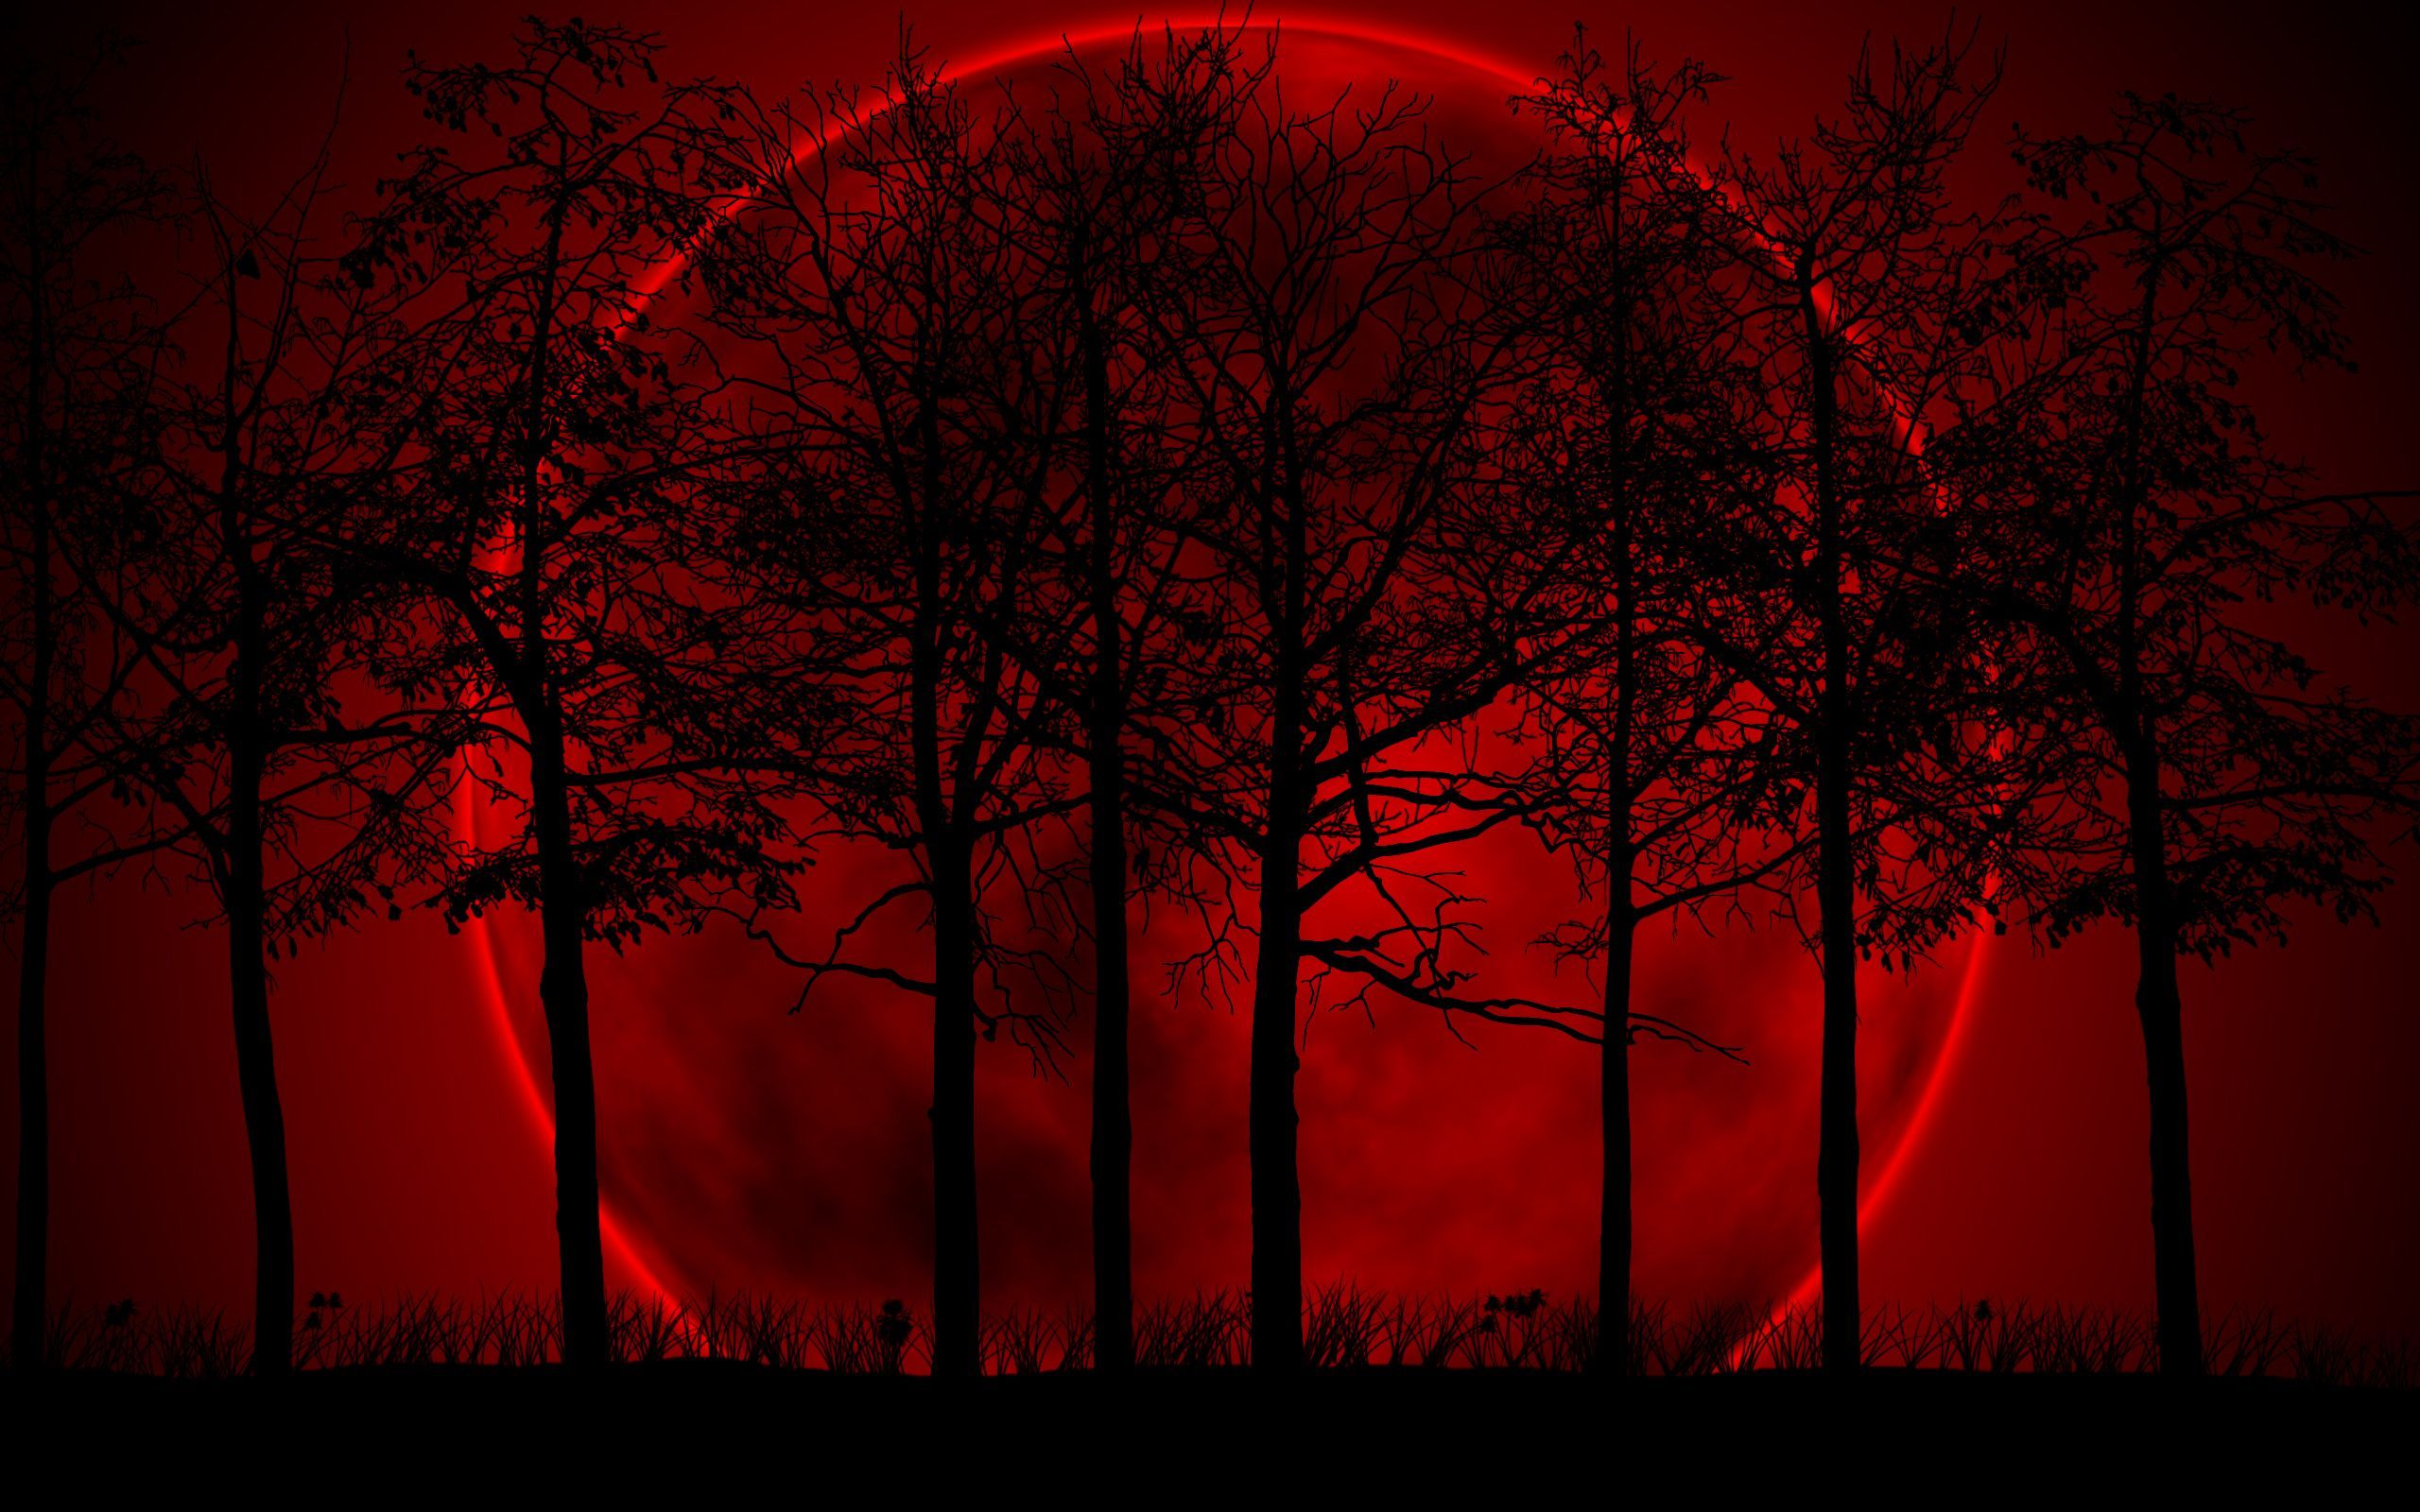 Red Moon Wallpapers